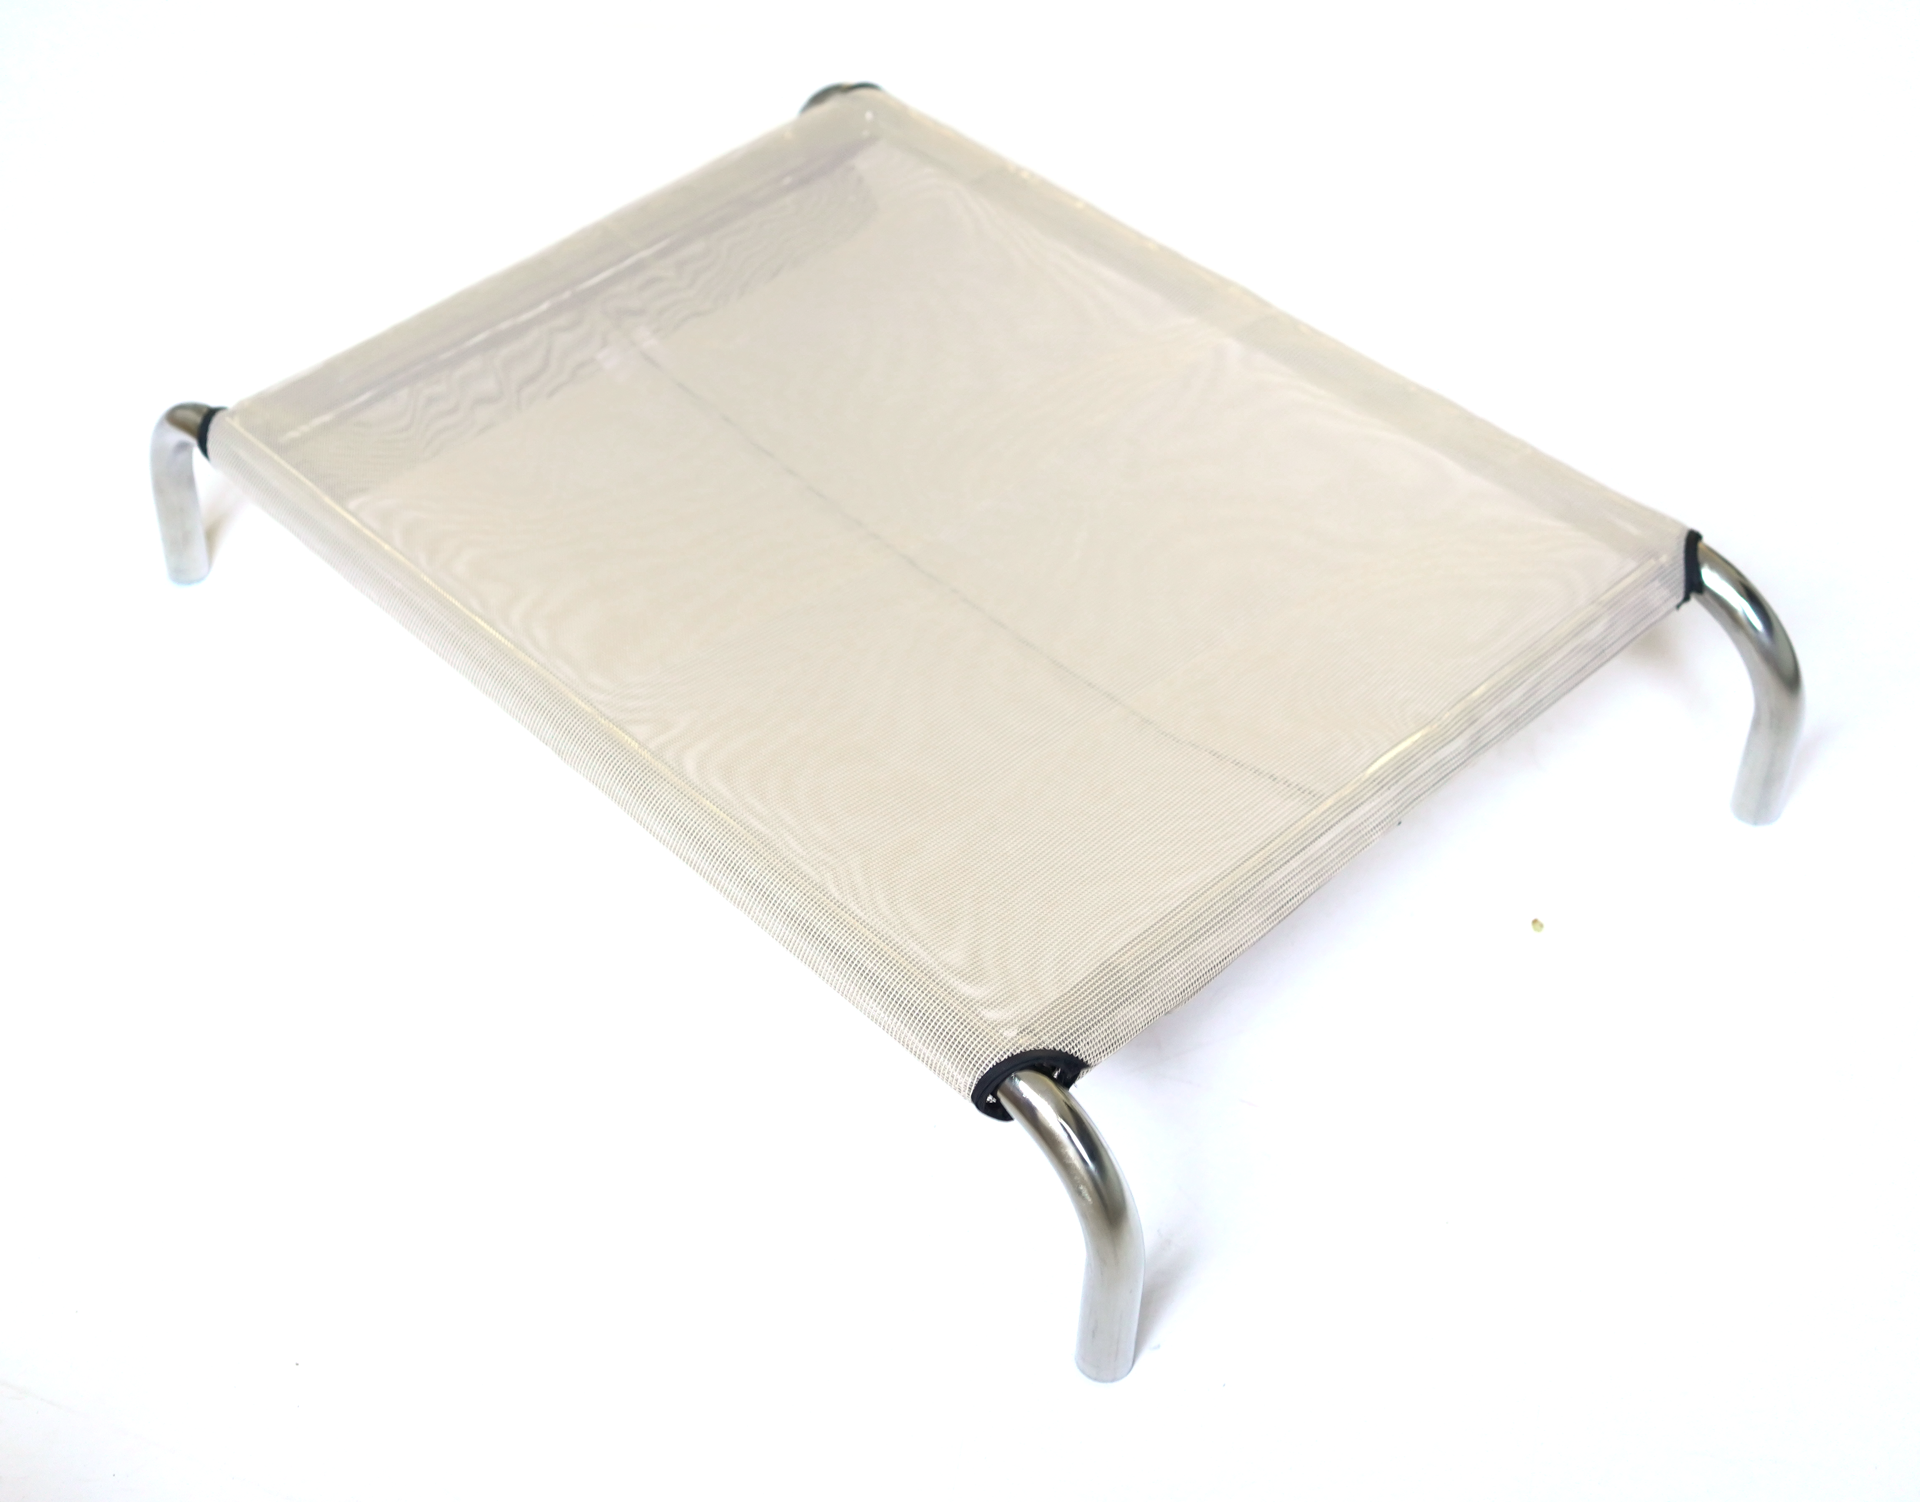 HiK9 Bed with Fawn Mesh Cover